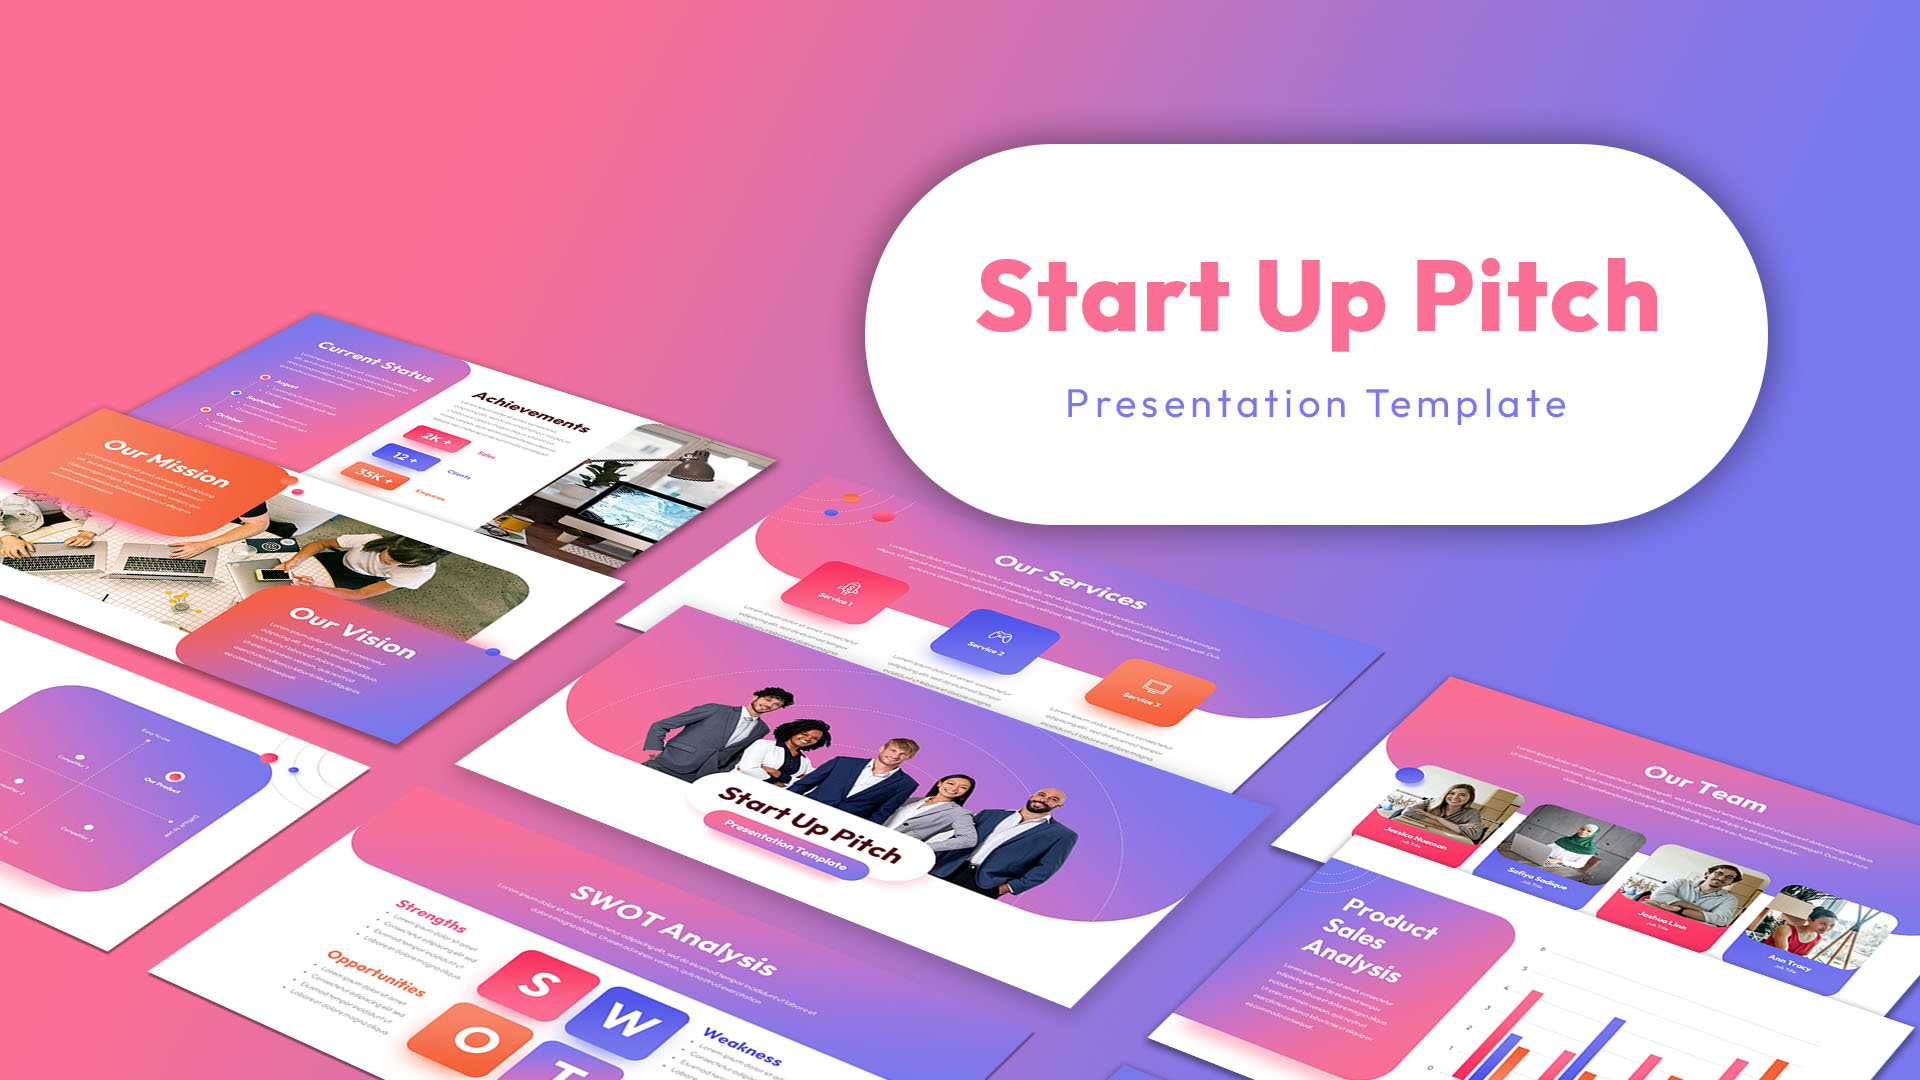 StartUp Pitch PowerPoint Template